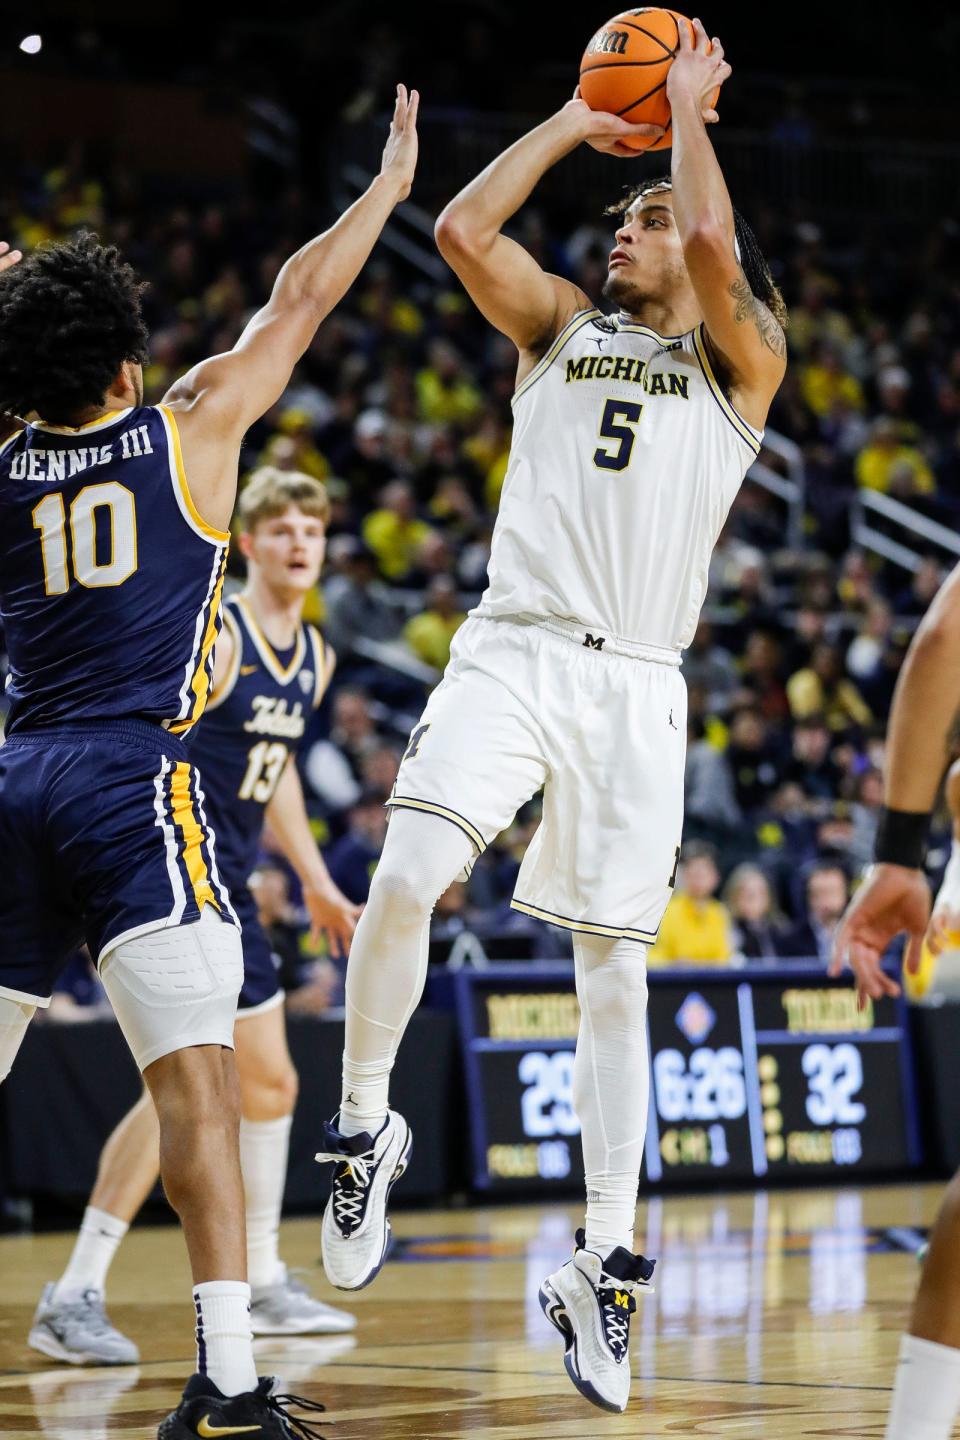 Michigan forward Terrance Williams II (5) makes a jump shot against Toledo guard RayJ Dennis (10) during the first half of the first round of the NIT at Crisler Center in Ann Arbor on Tuesday, March 14, 2023.